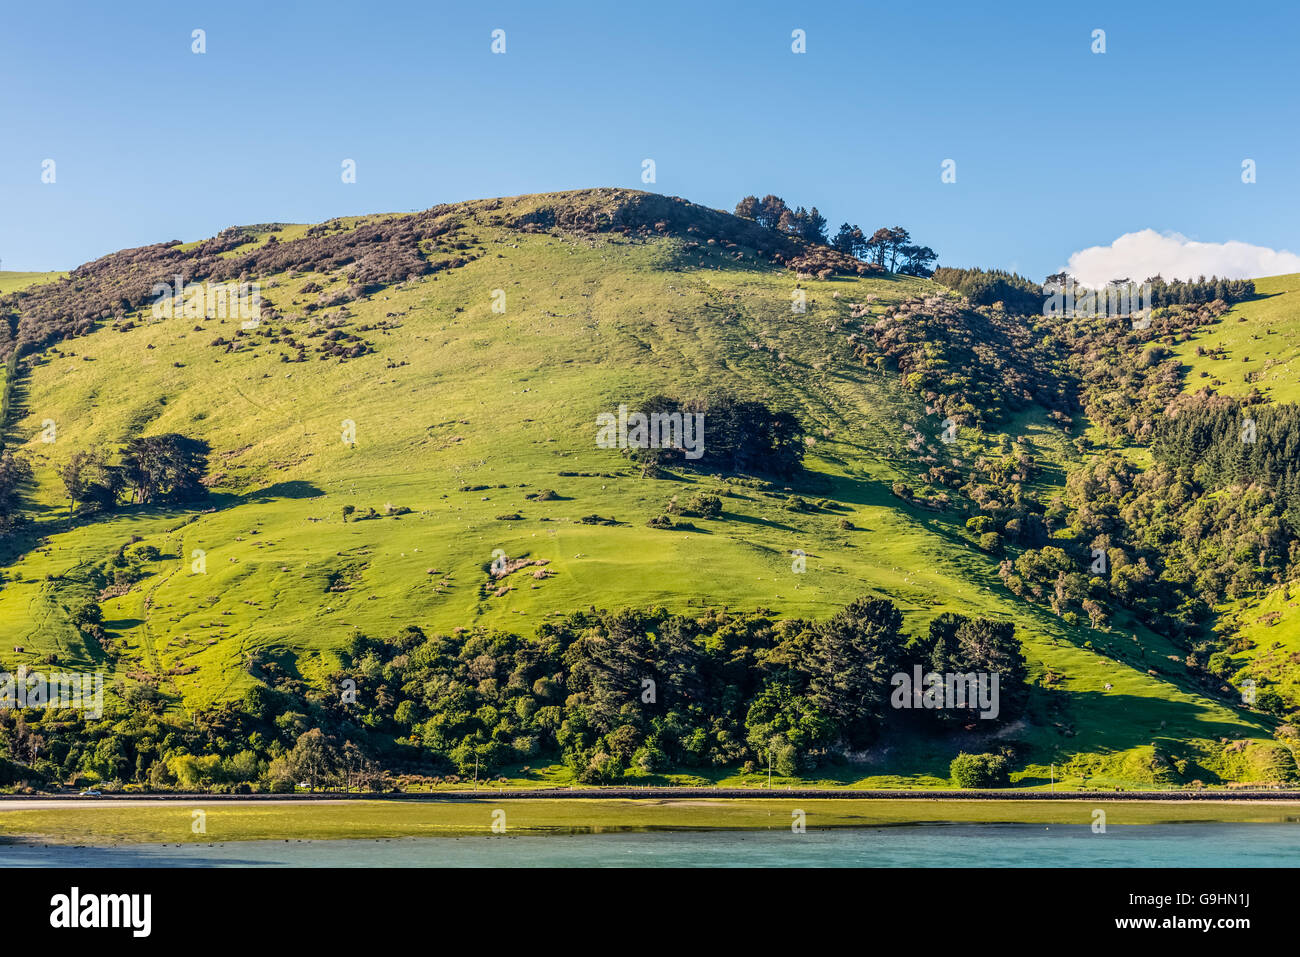 Beautiful landscape of the New Zealand - hills covered by green grass with herds of sheep - near Dunedin Stock Photo